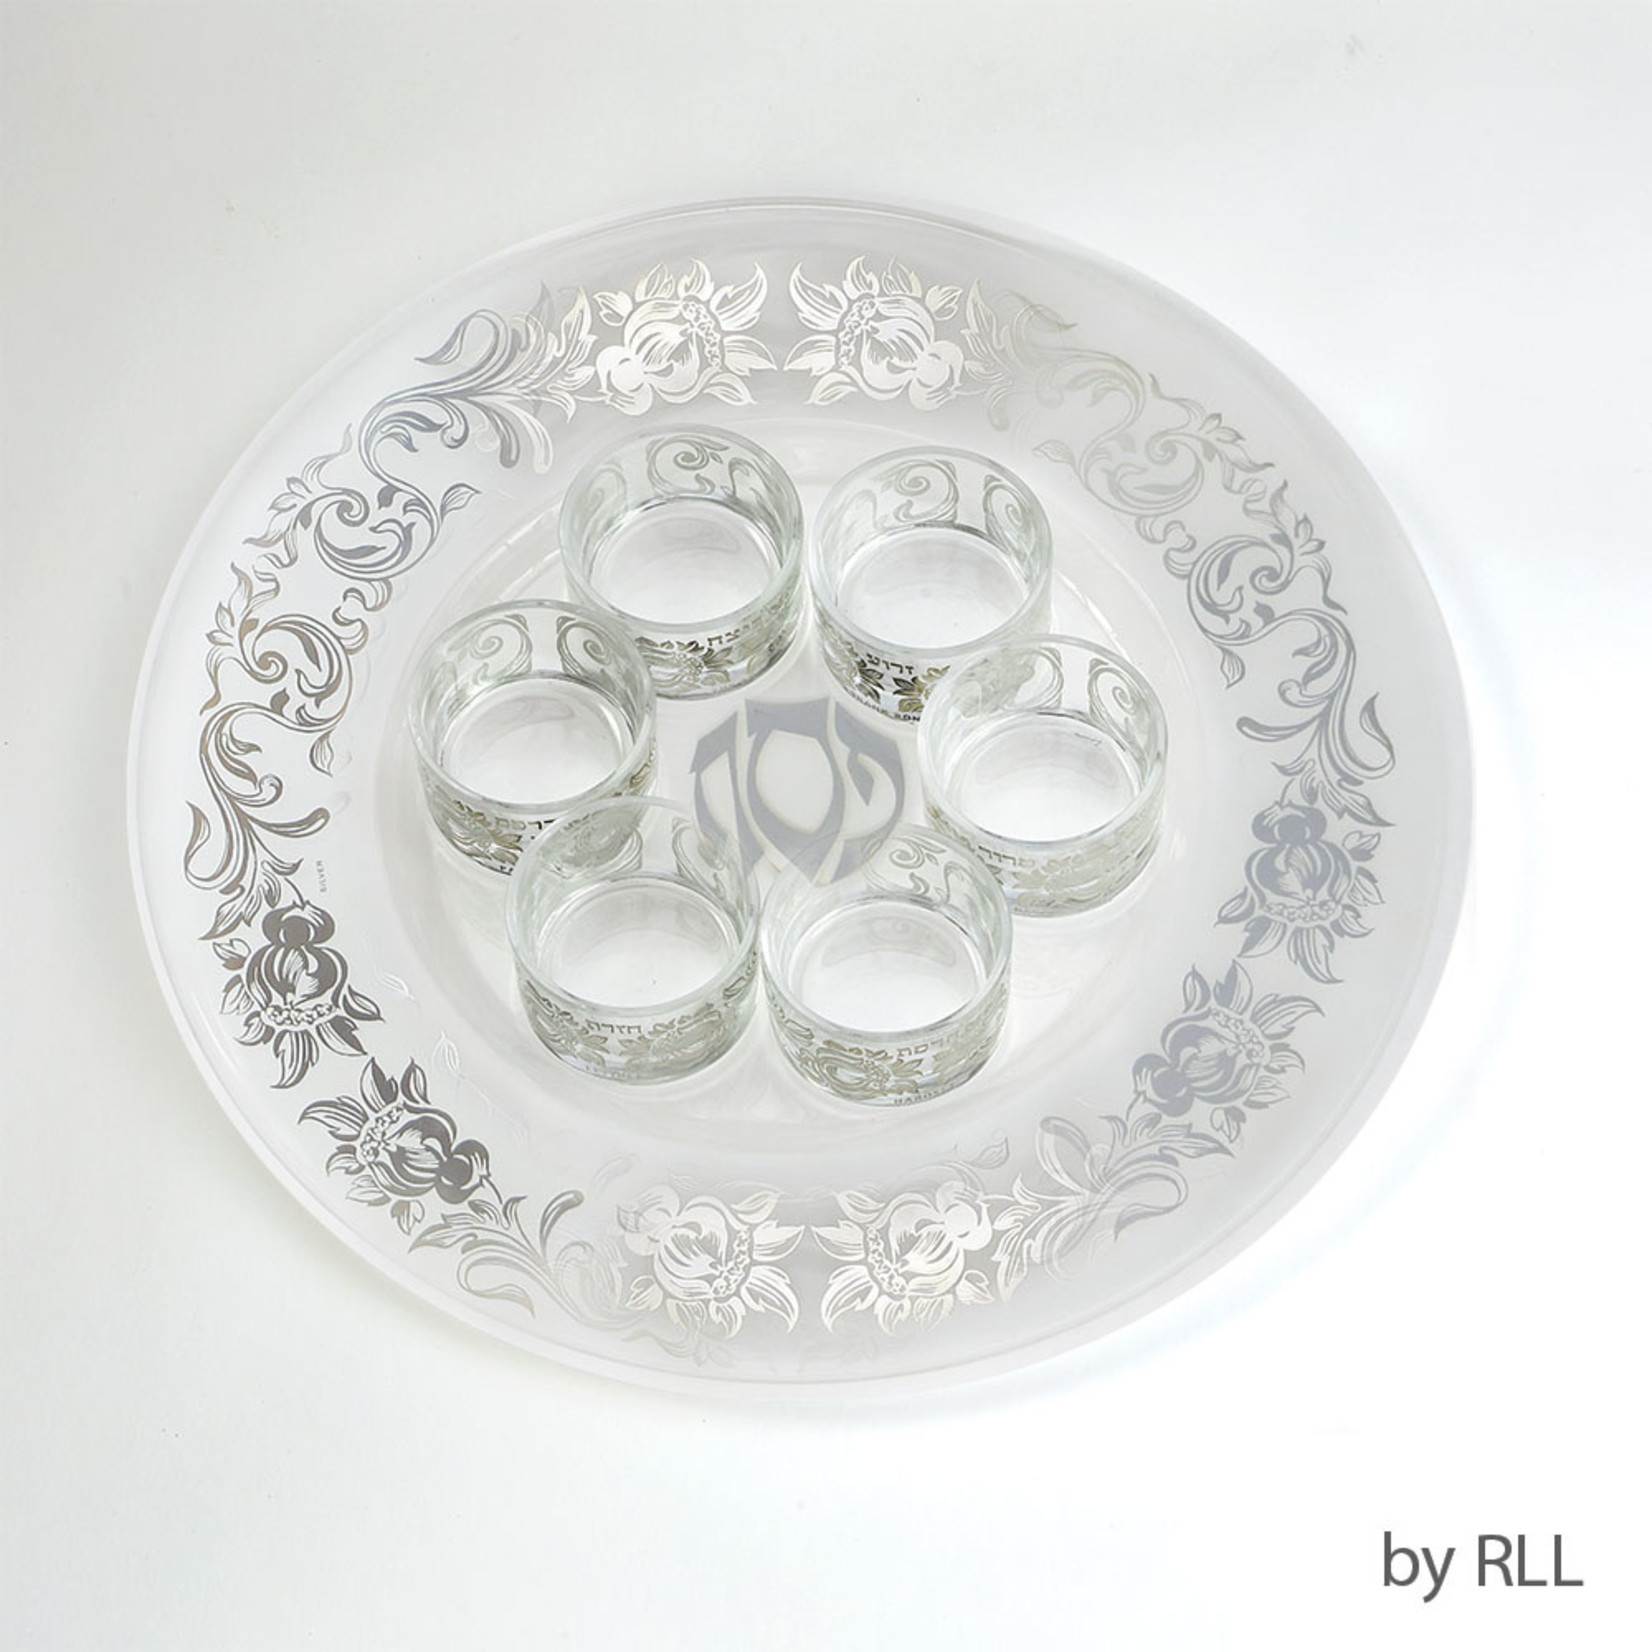 7 Piece Glass Seder Plate With Silver Floral Design